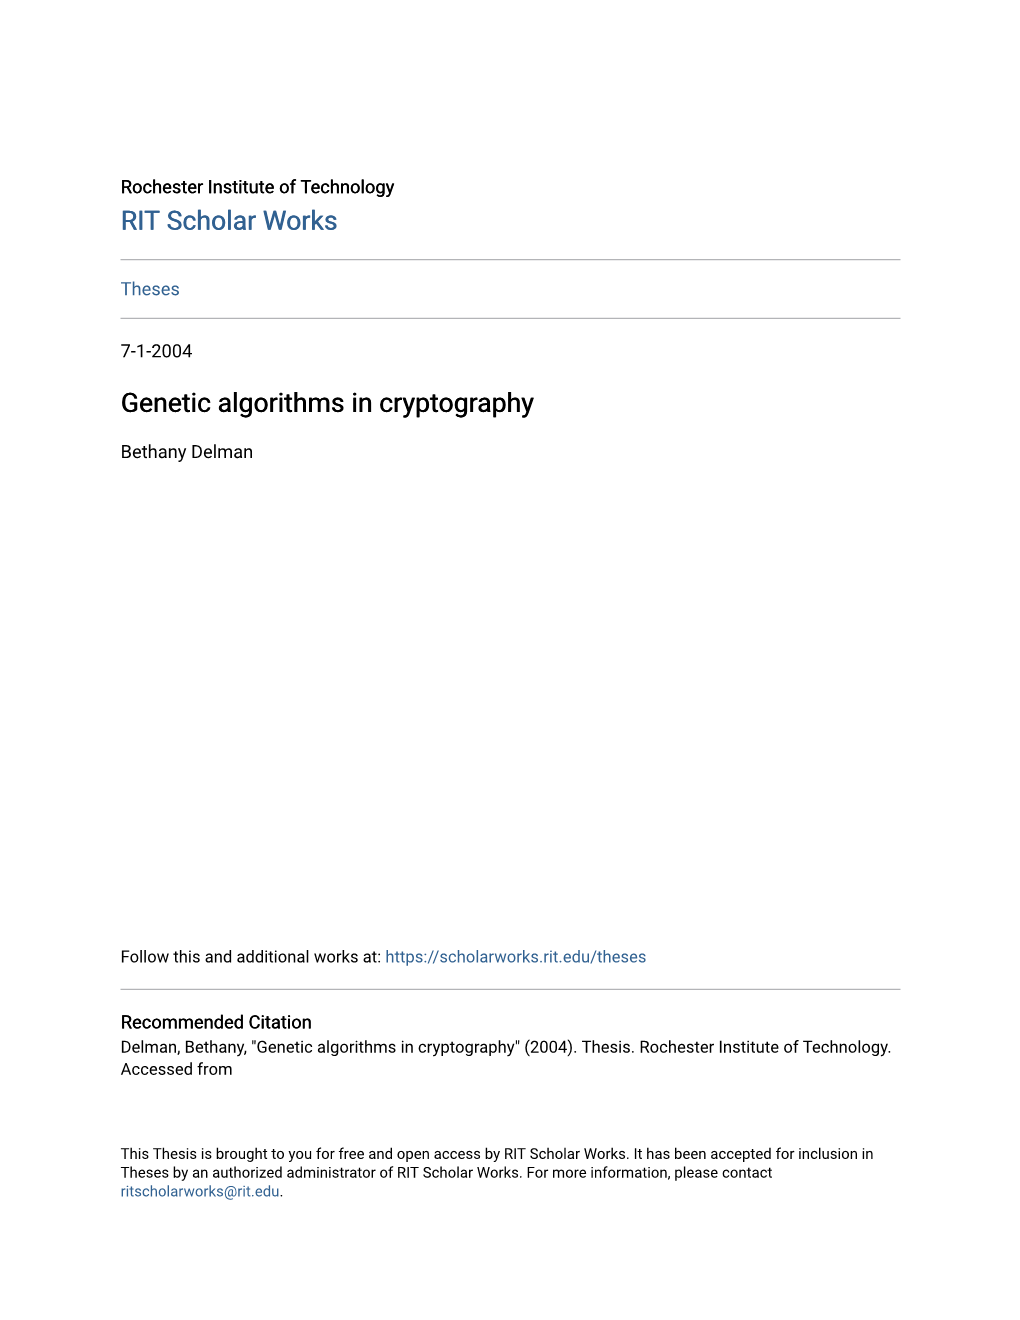 Genetic Algorithms in Cryptography